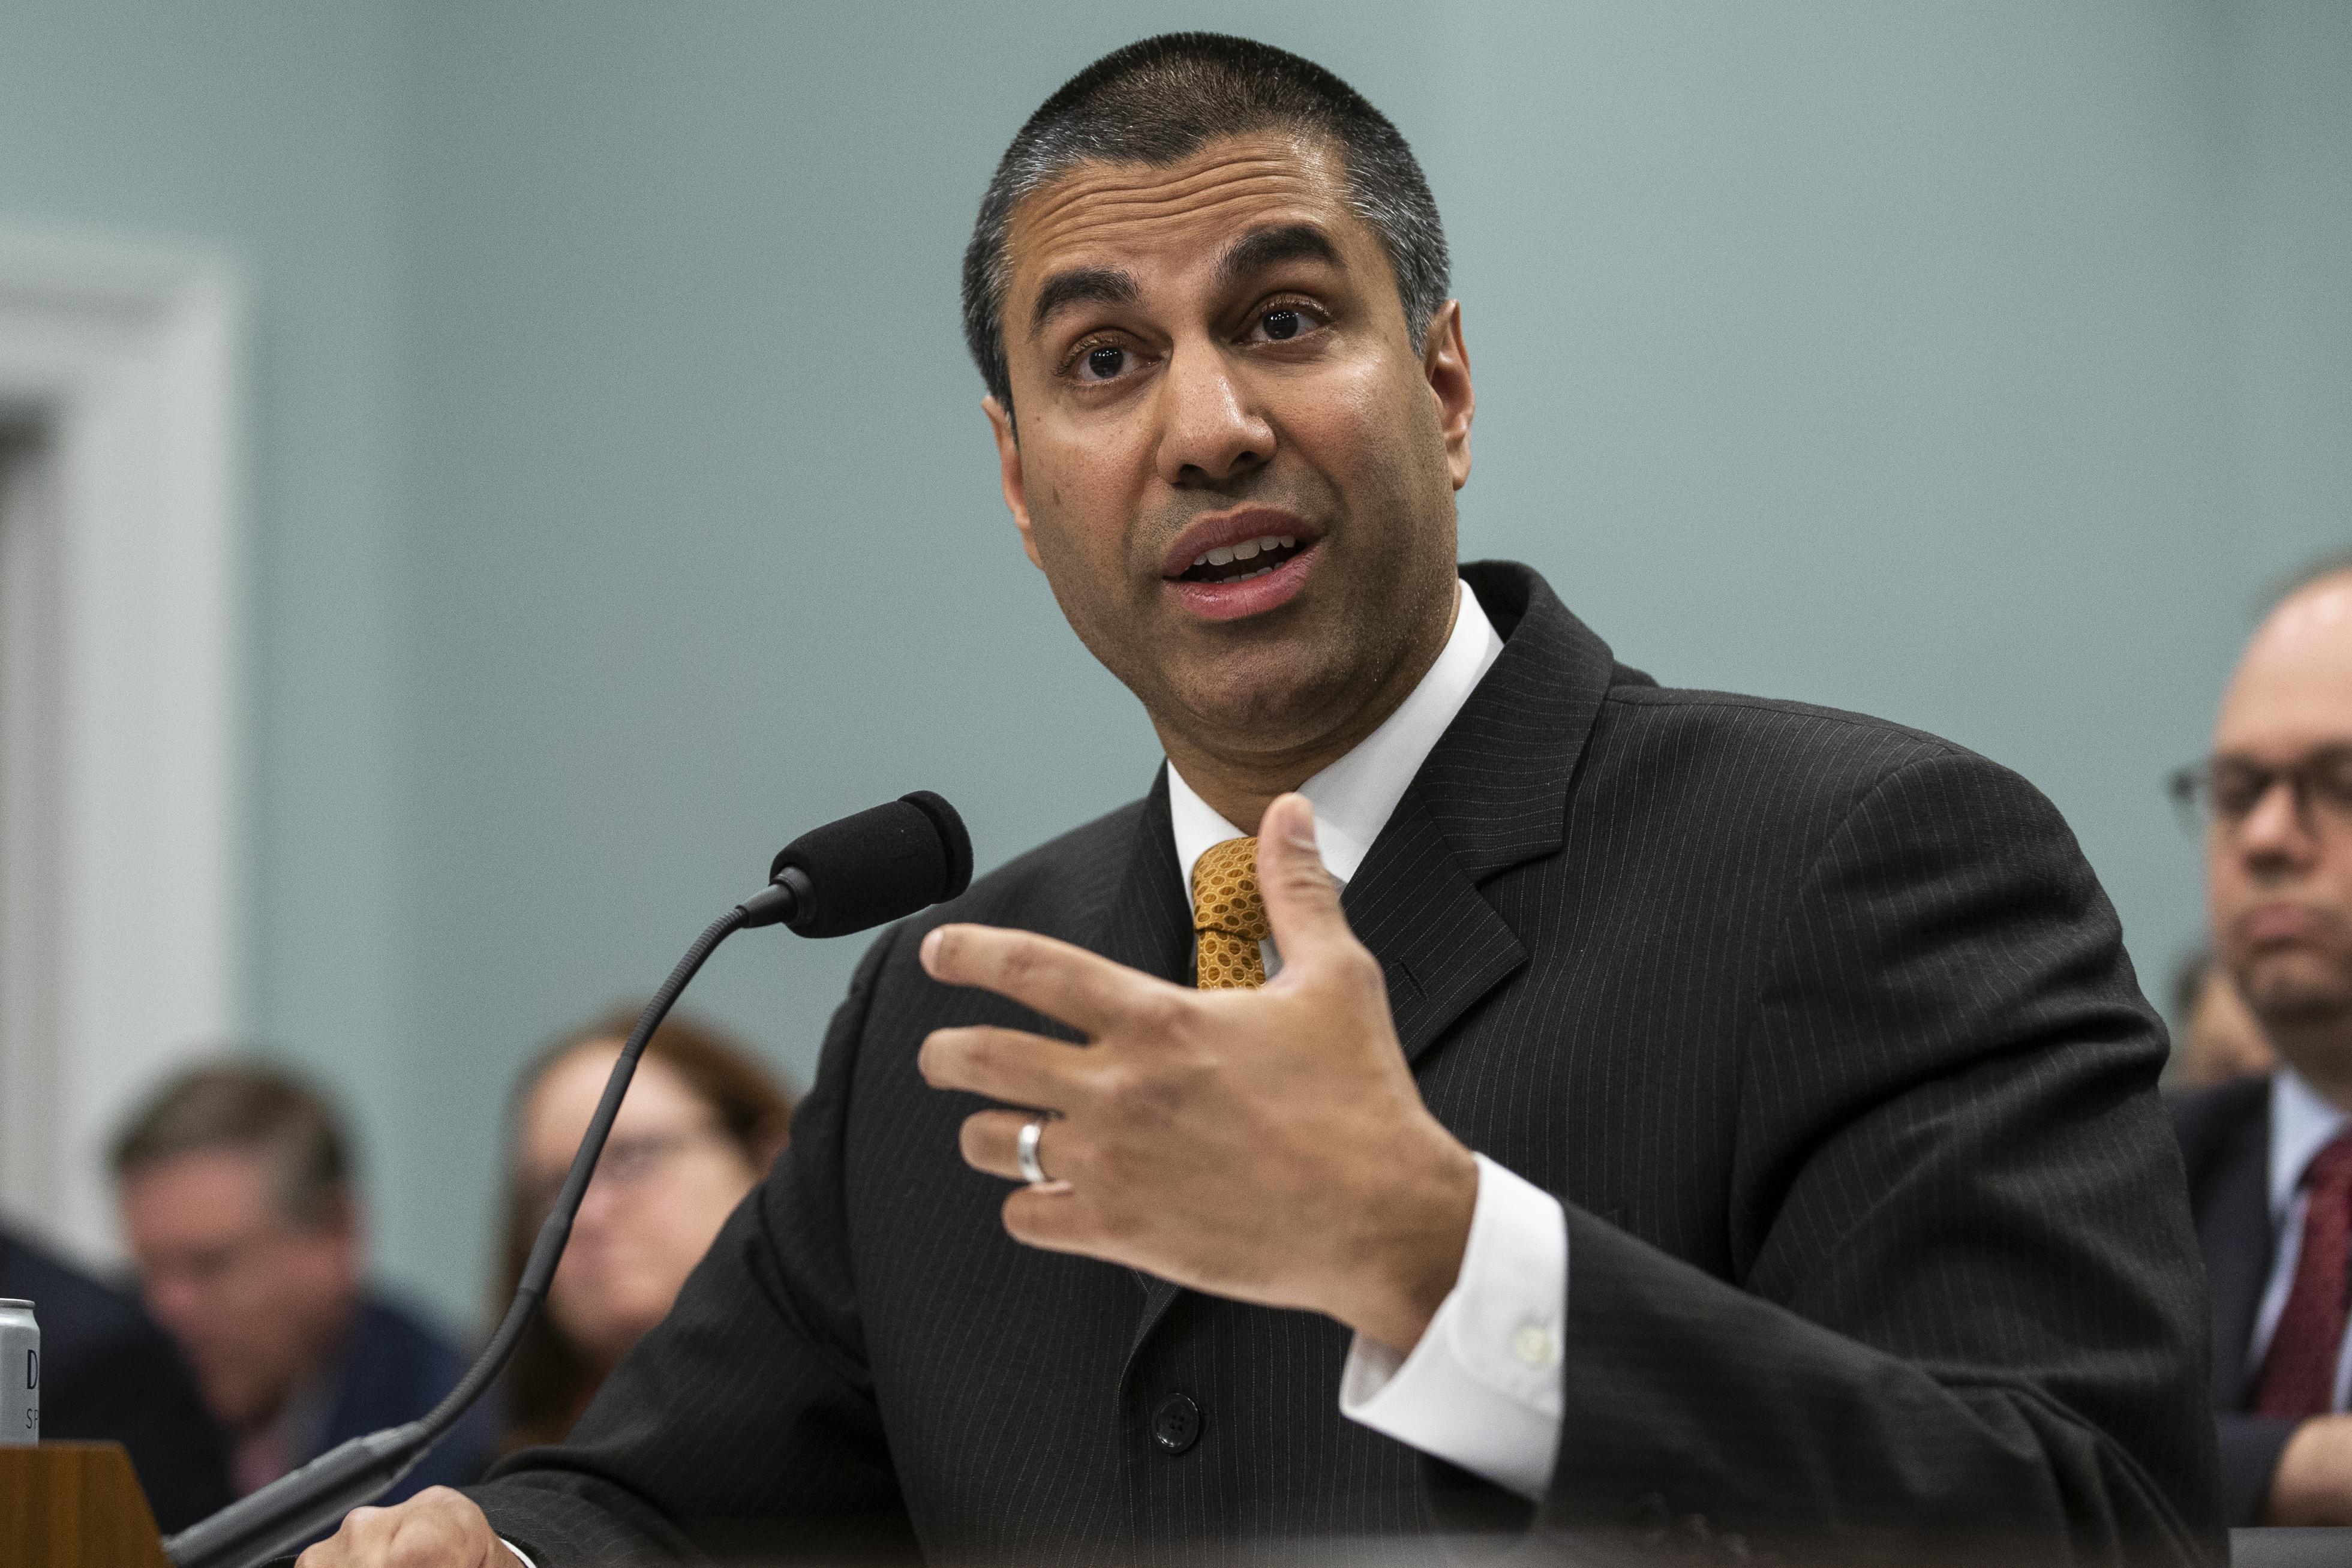 WASHINGTON, DC - APRIL 26: FCC Chairman Ajit Pai testifies before the House Appropriations Committee during a hearing on the 2019FY FCC Budget on Capitol Hill on April 26, 2018 in Washington, DC. (Photo by Alex Edelman/Getty Images)